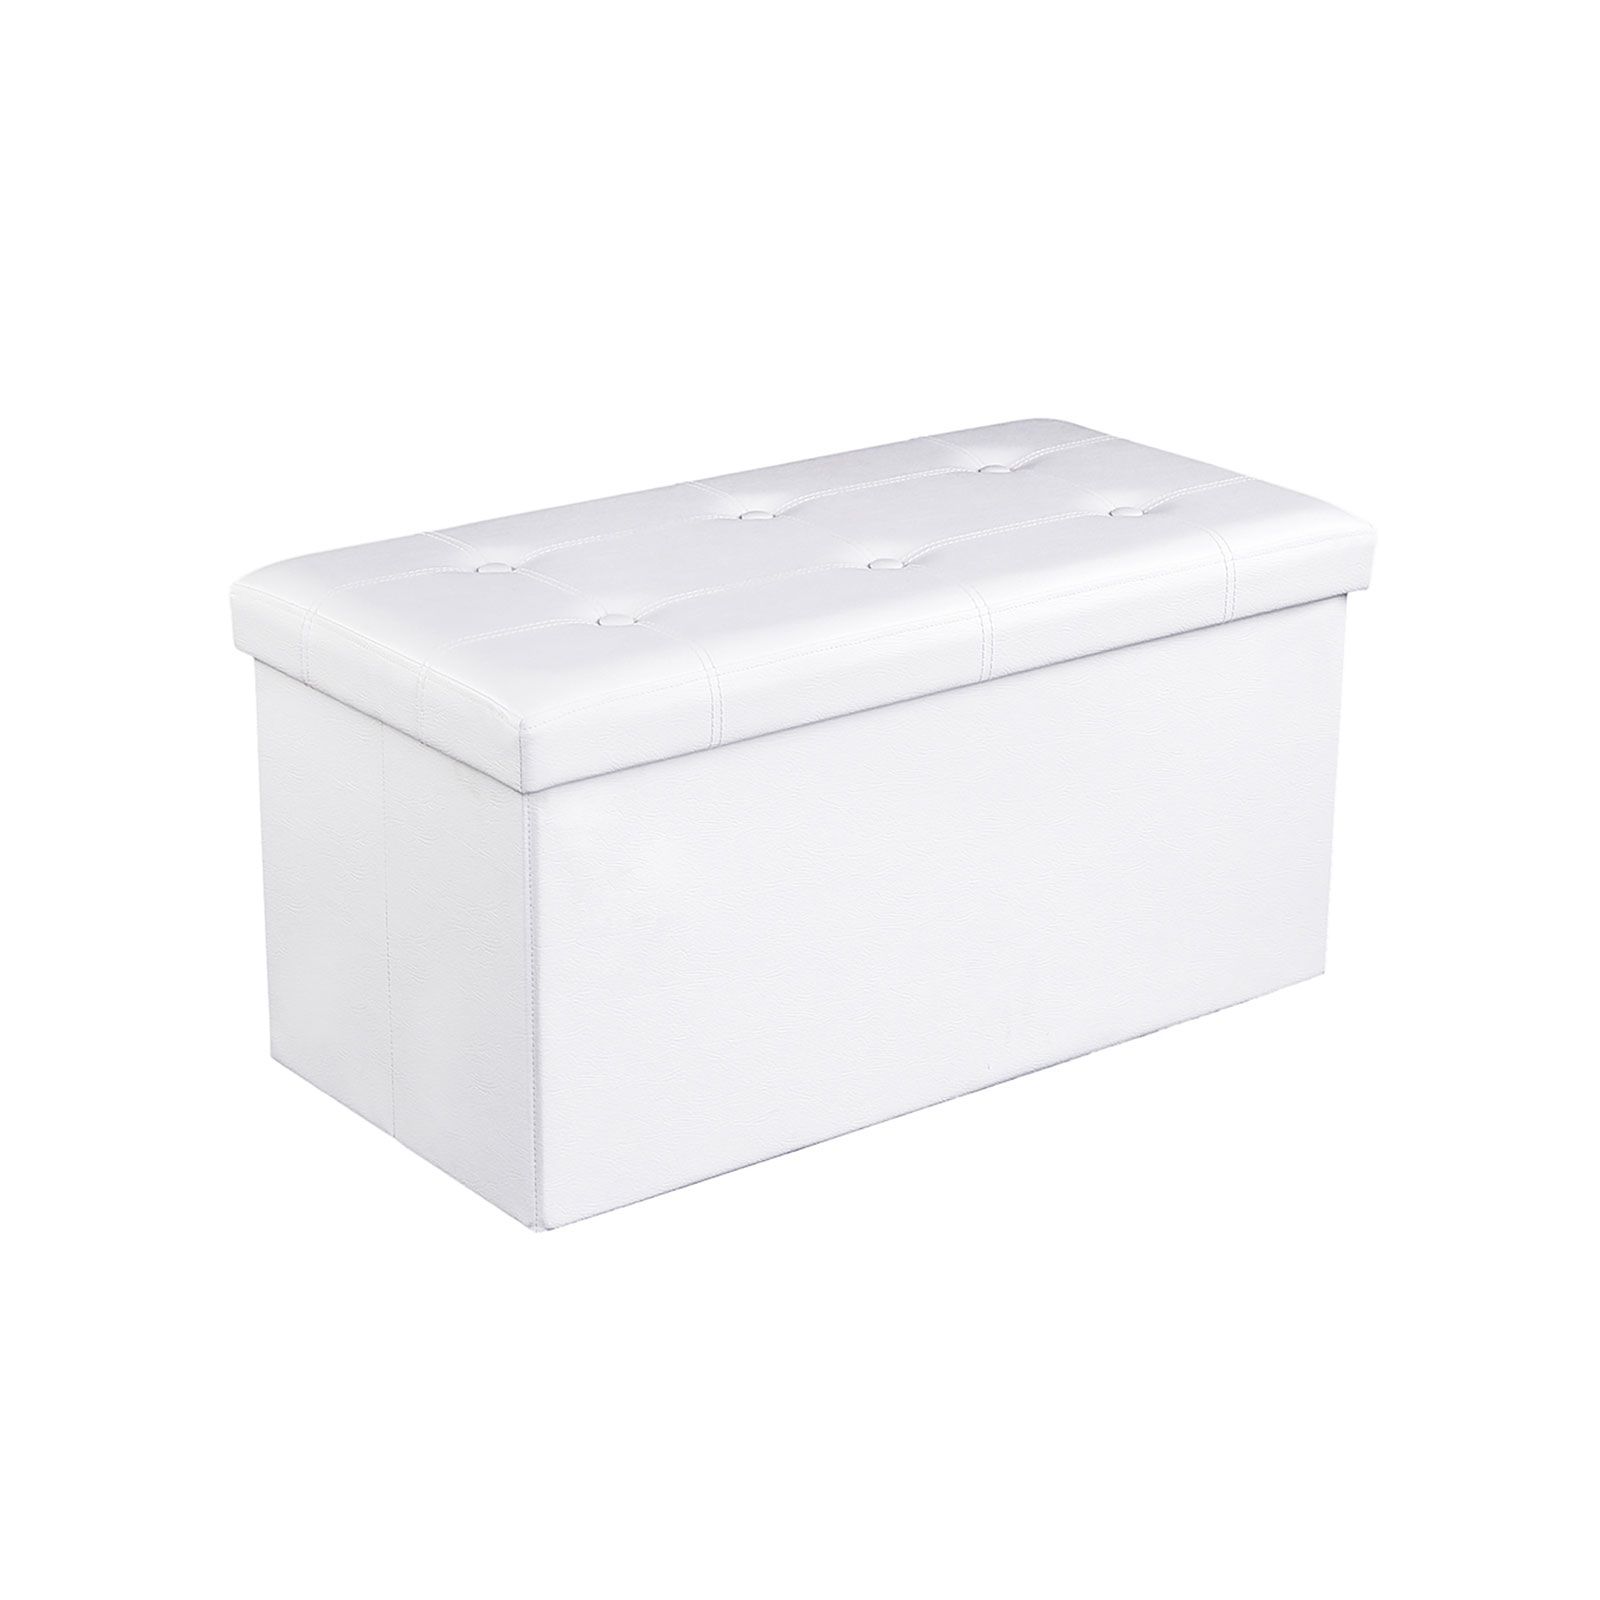 White Storage Ottoman Bench with Padded Seat | Home Storage